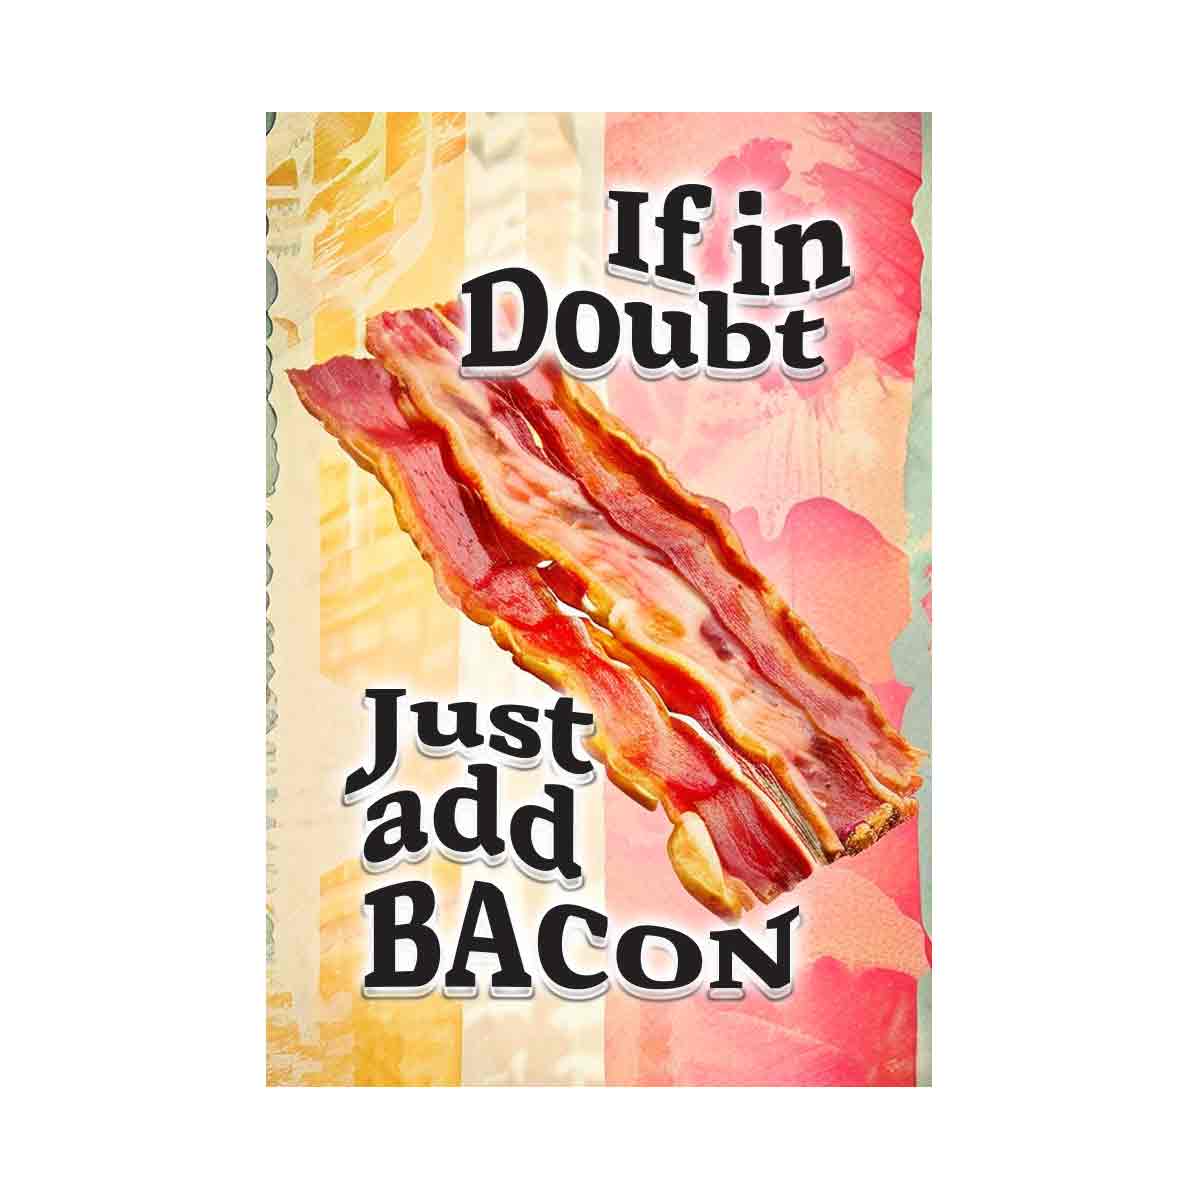 If in doubt Just add bacon